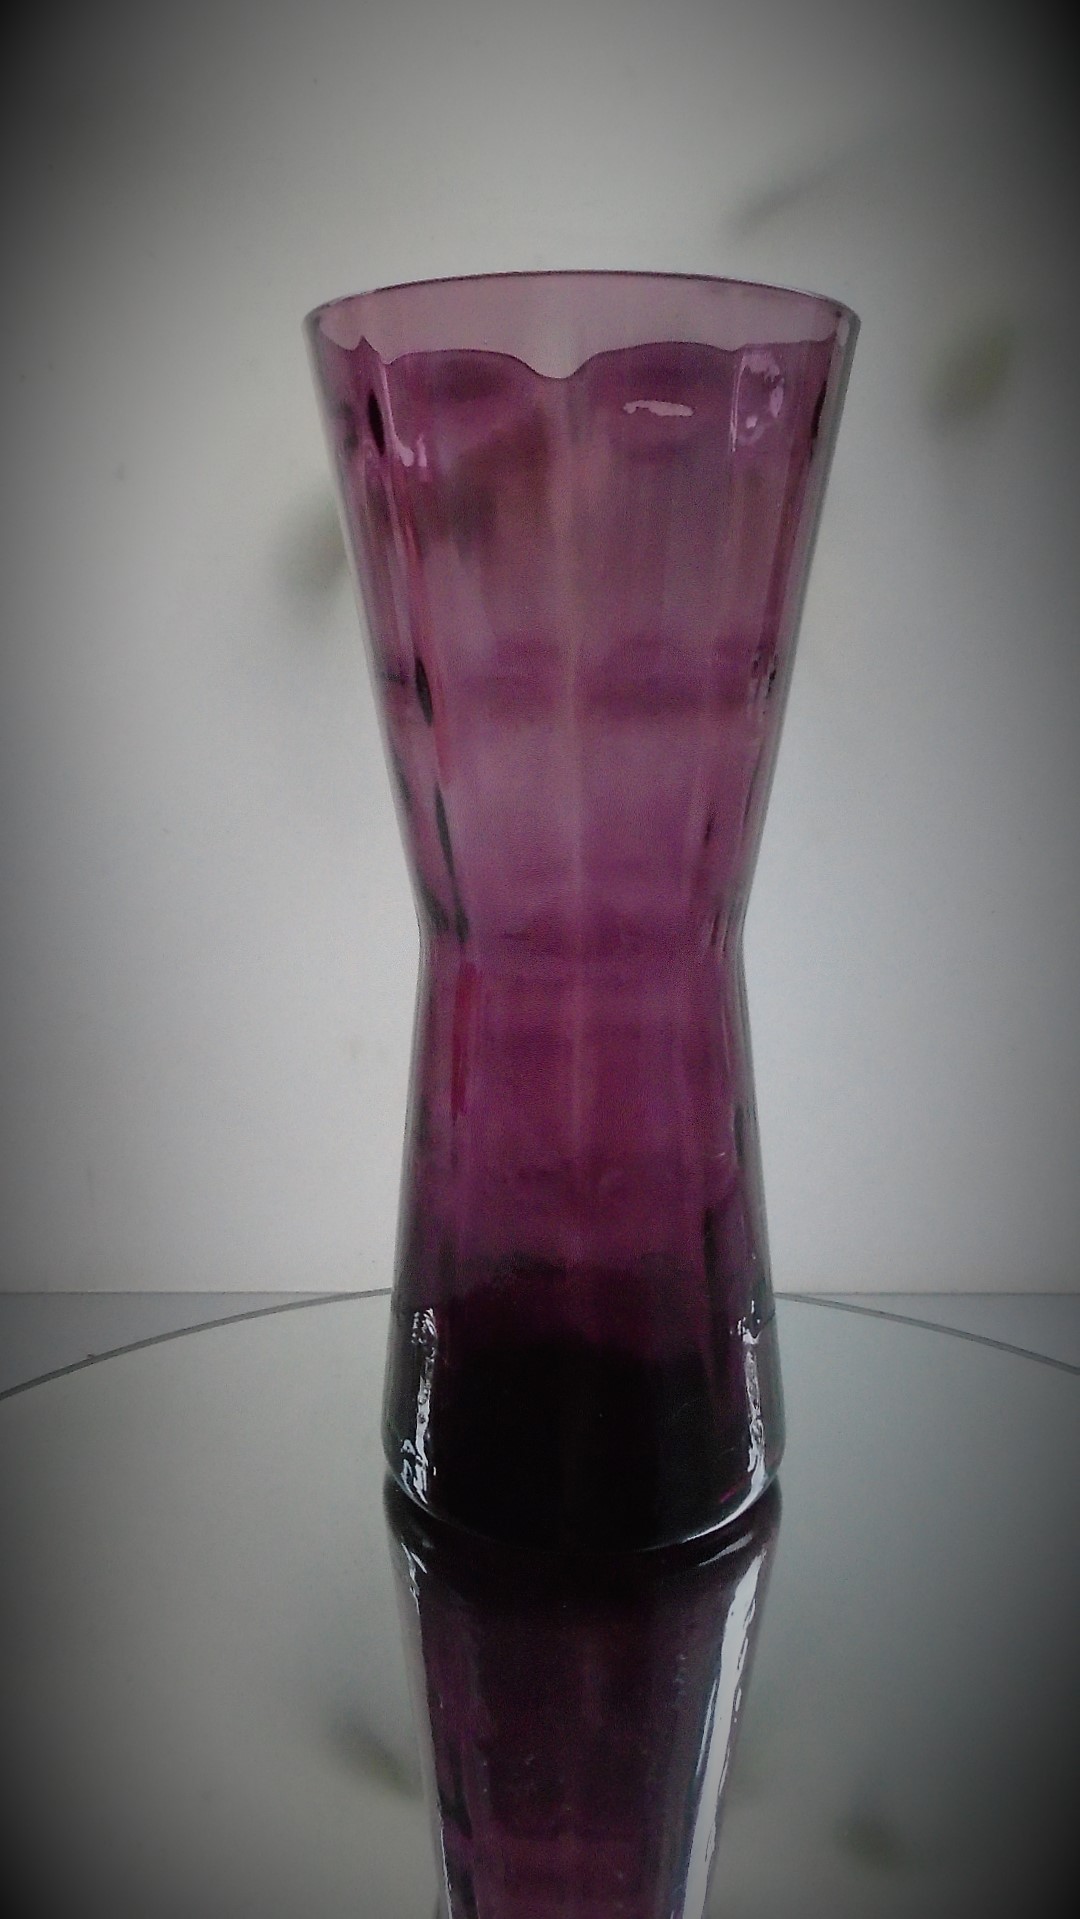 Fine example of vintage mid century purple glass vase from Swedish maker Alsterfors  designed by Fabian Lundquist